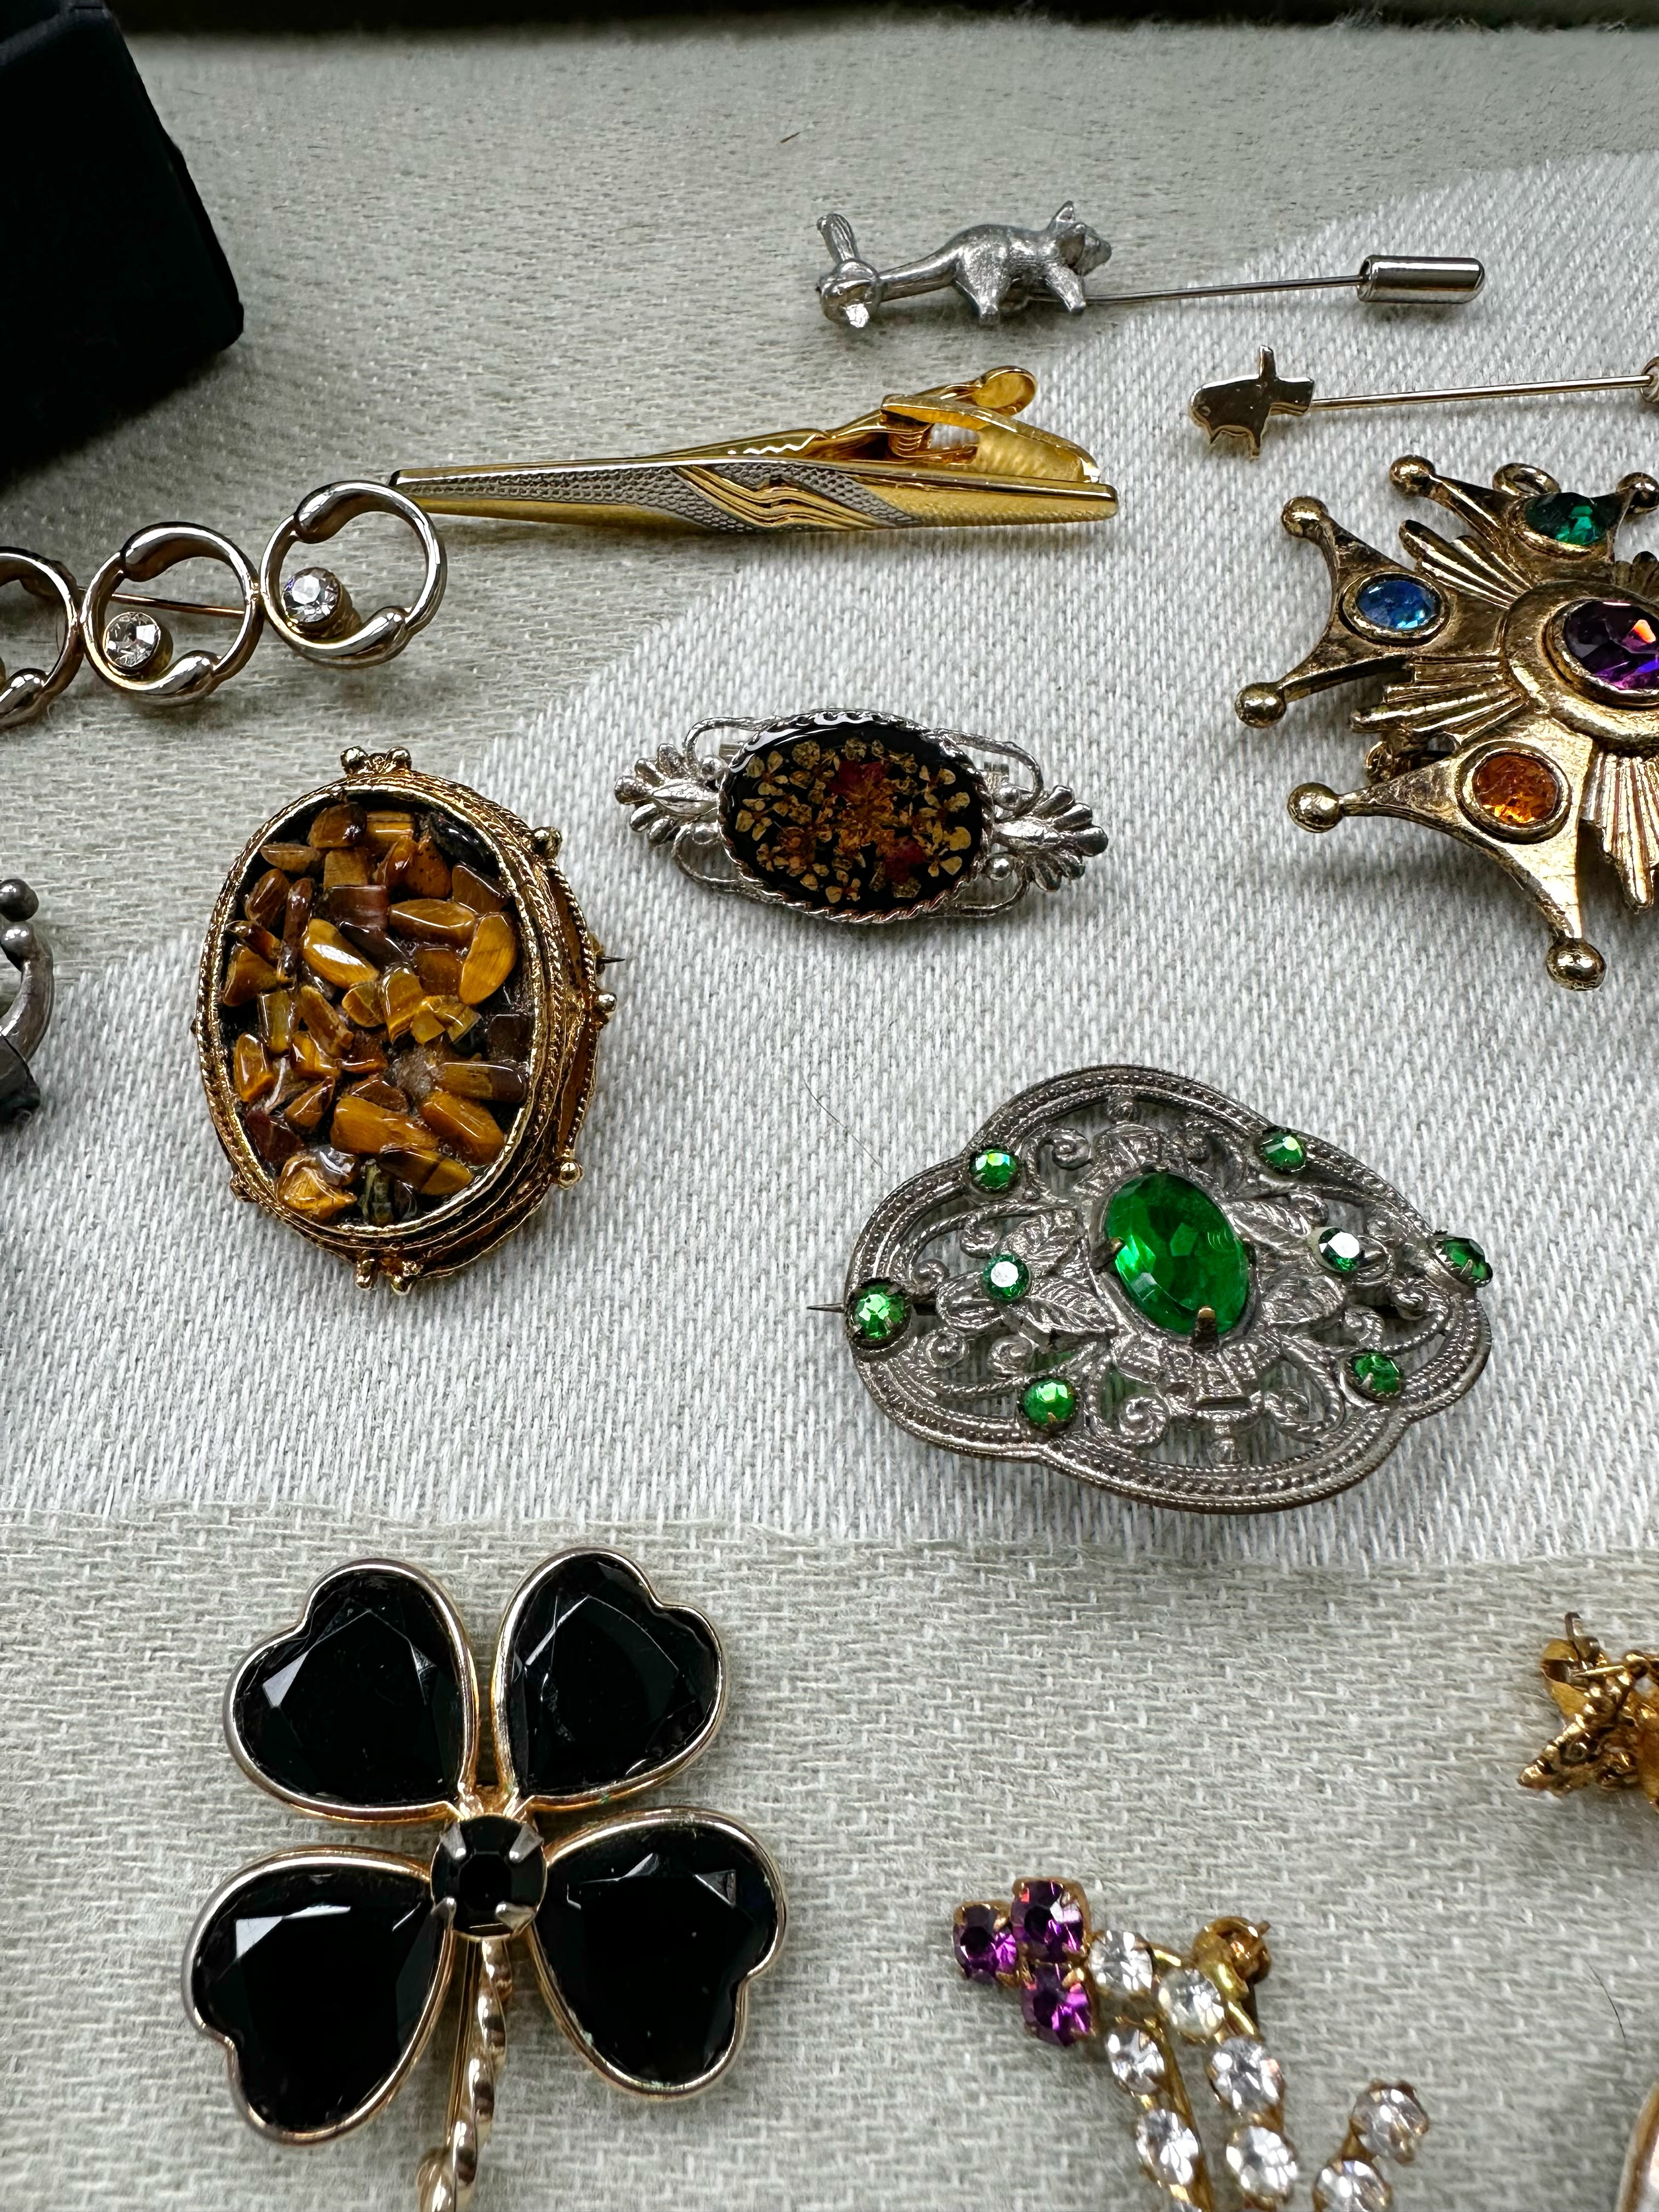 Vintage Brooches - Image 5 of 7